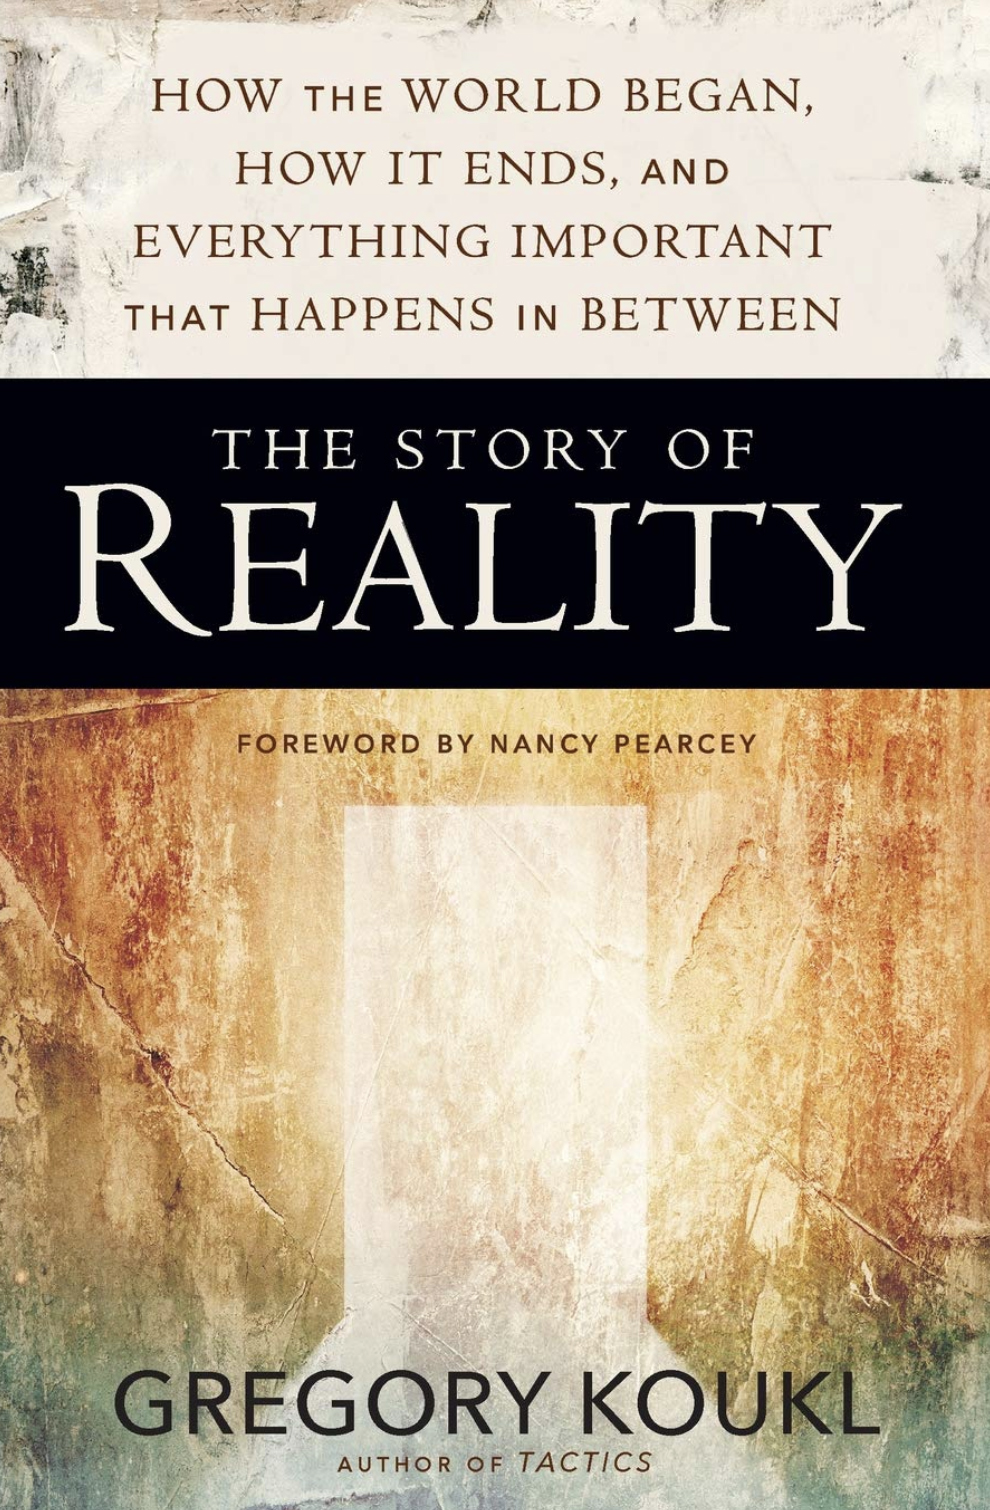 The Story of Reality by Gregory Koukl